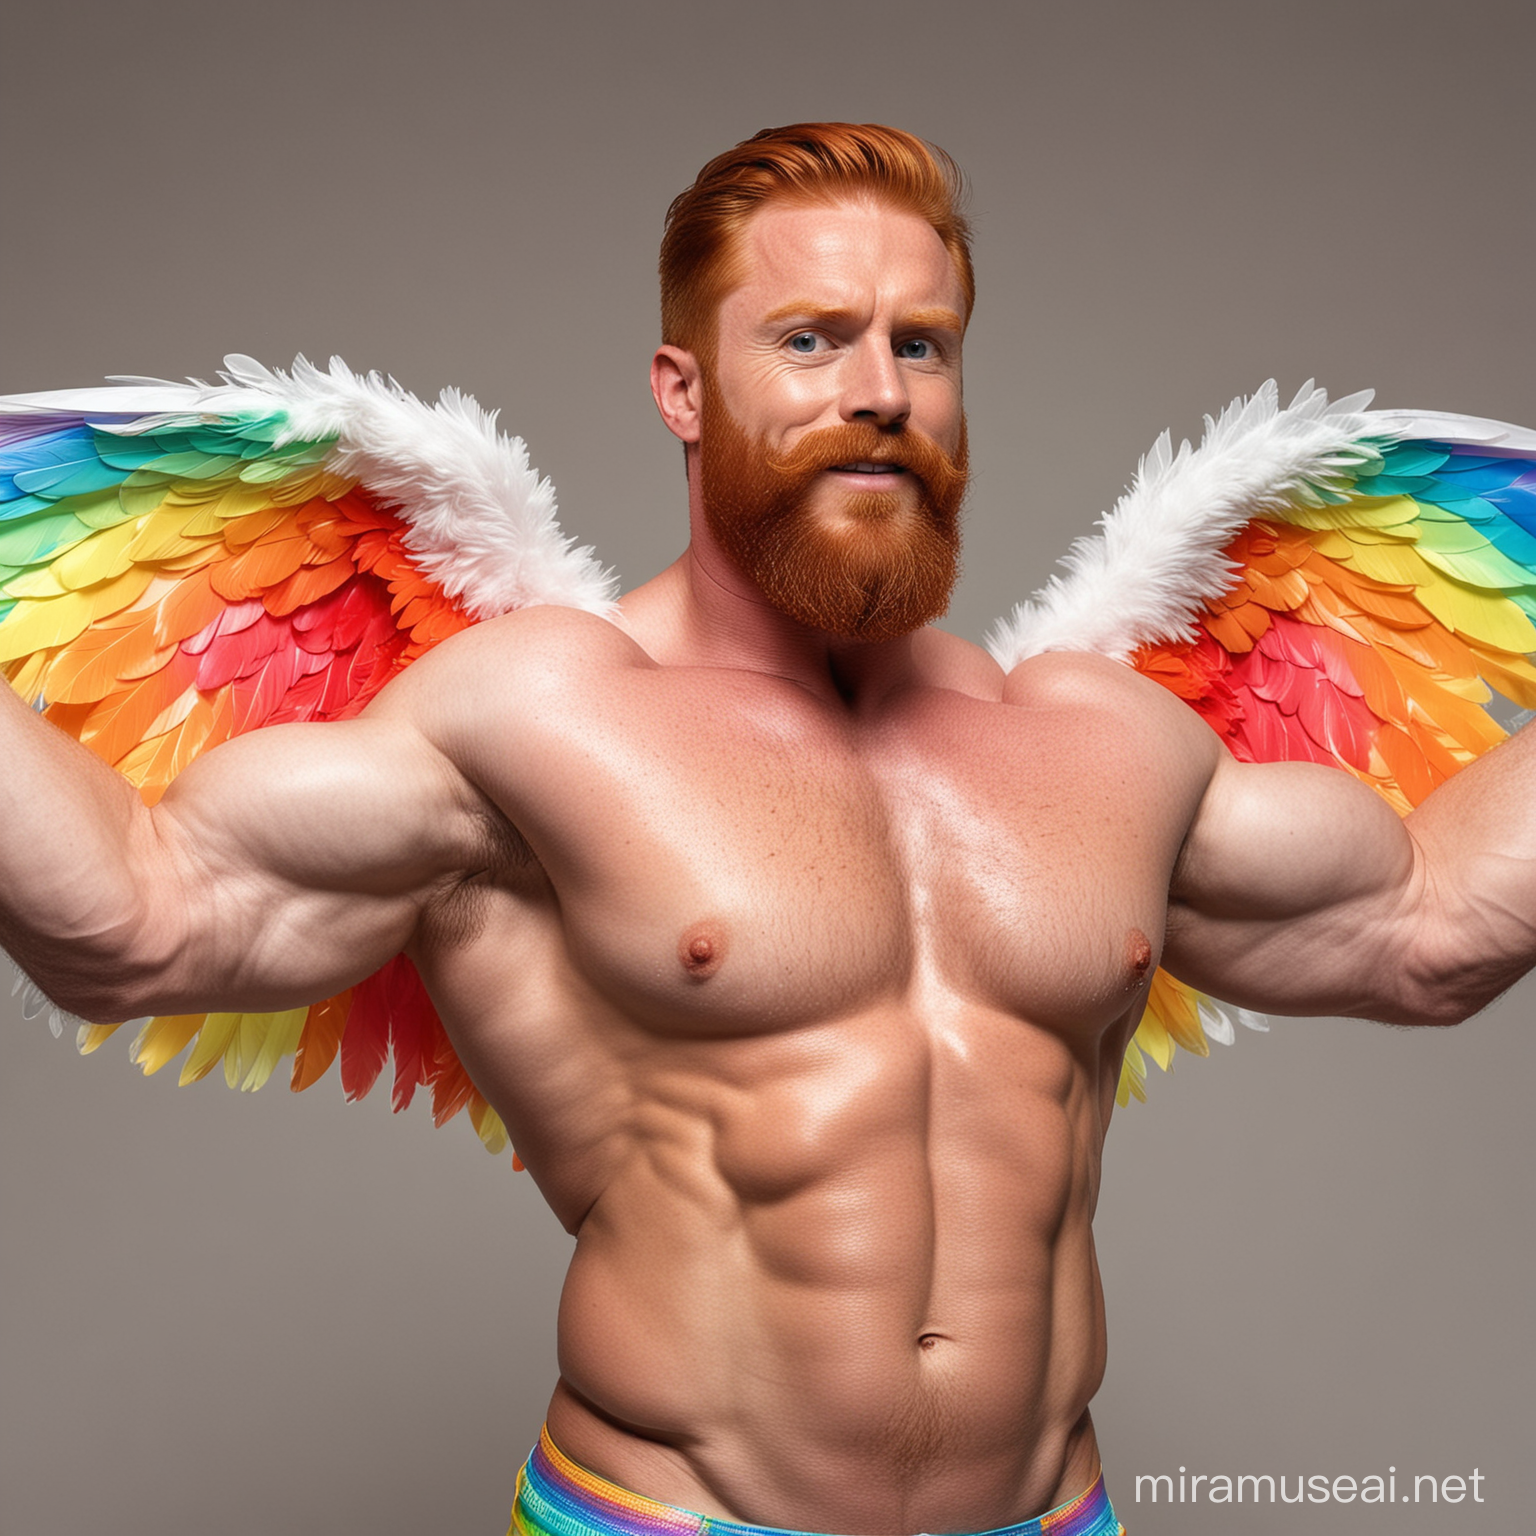 Topless 30s Ultra Beefy Redhead IFBB Bodybuilder Beard Daddy wearing Multi-Highlighter Bright Rainbow Coloured See Through Jacket with Eagle wings and Flexing Big Strong Arm with doraemon